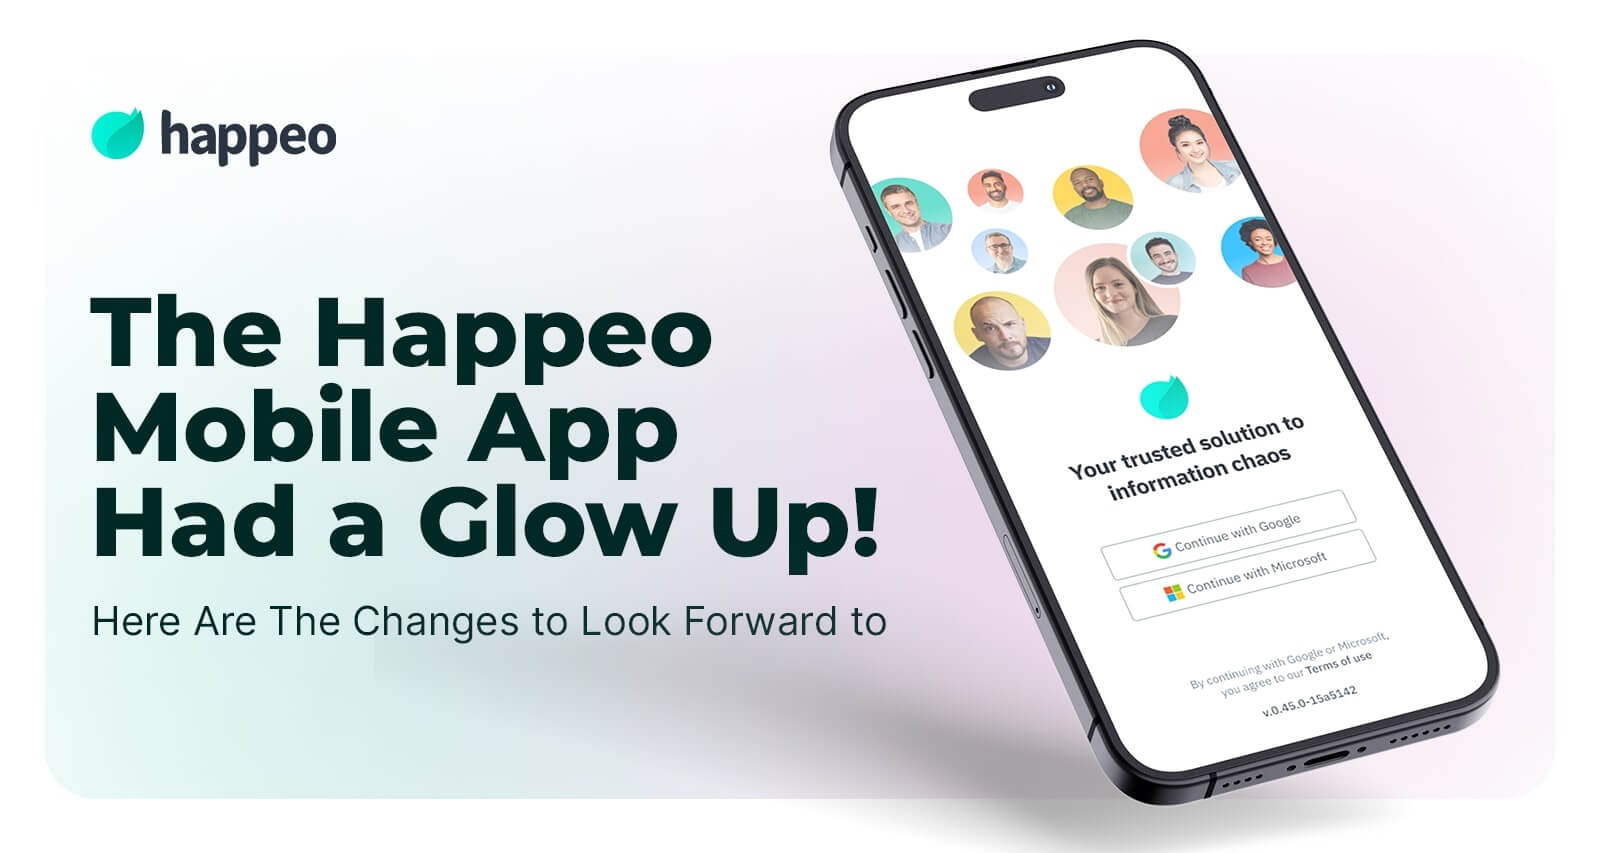 The Happeo Mobile App Had a Glow Up: Here Are The Changes to Look Forward to